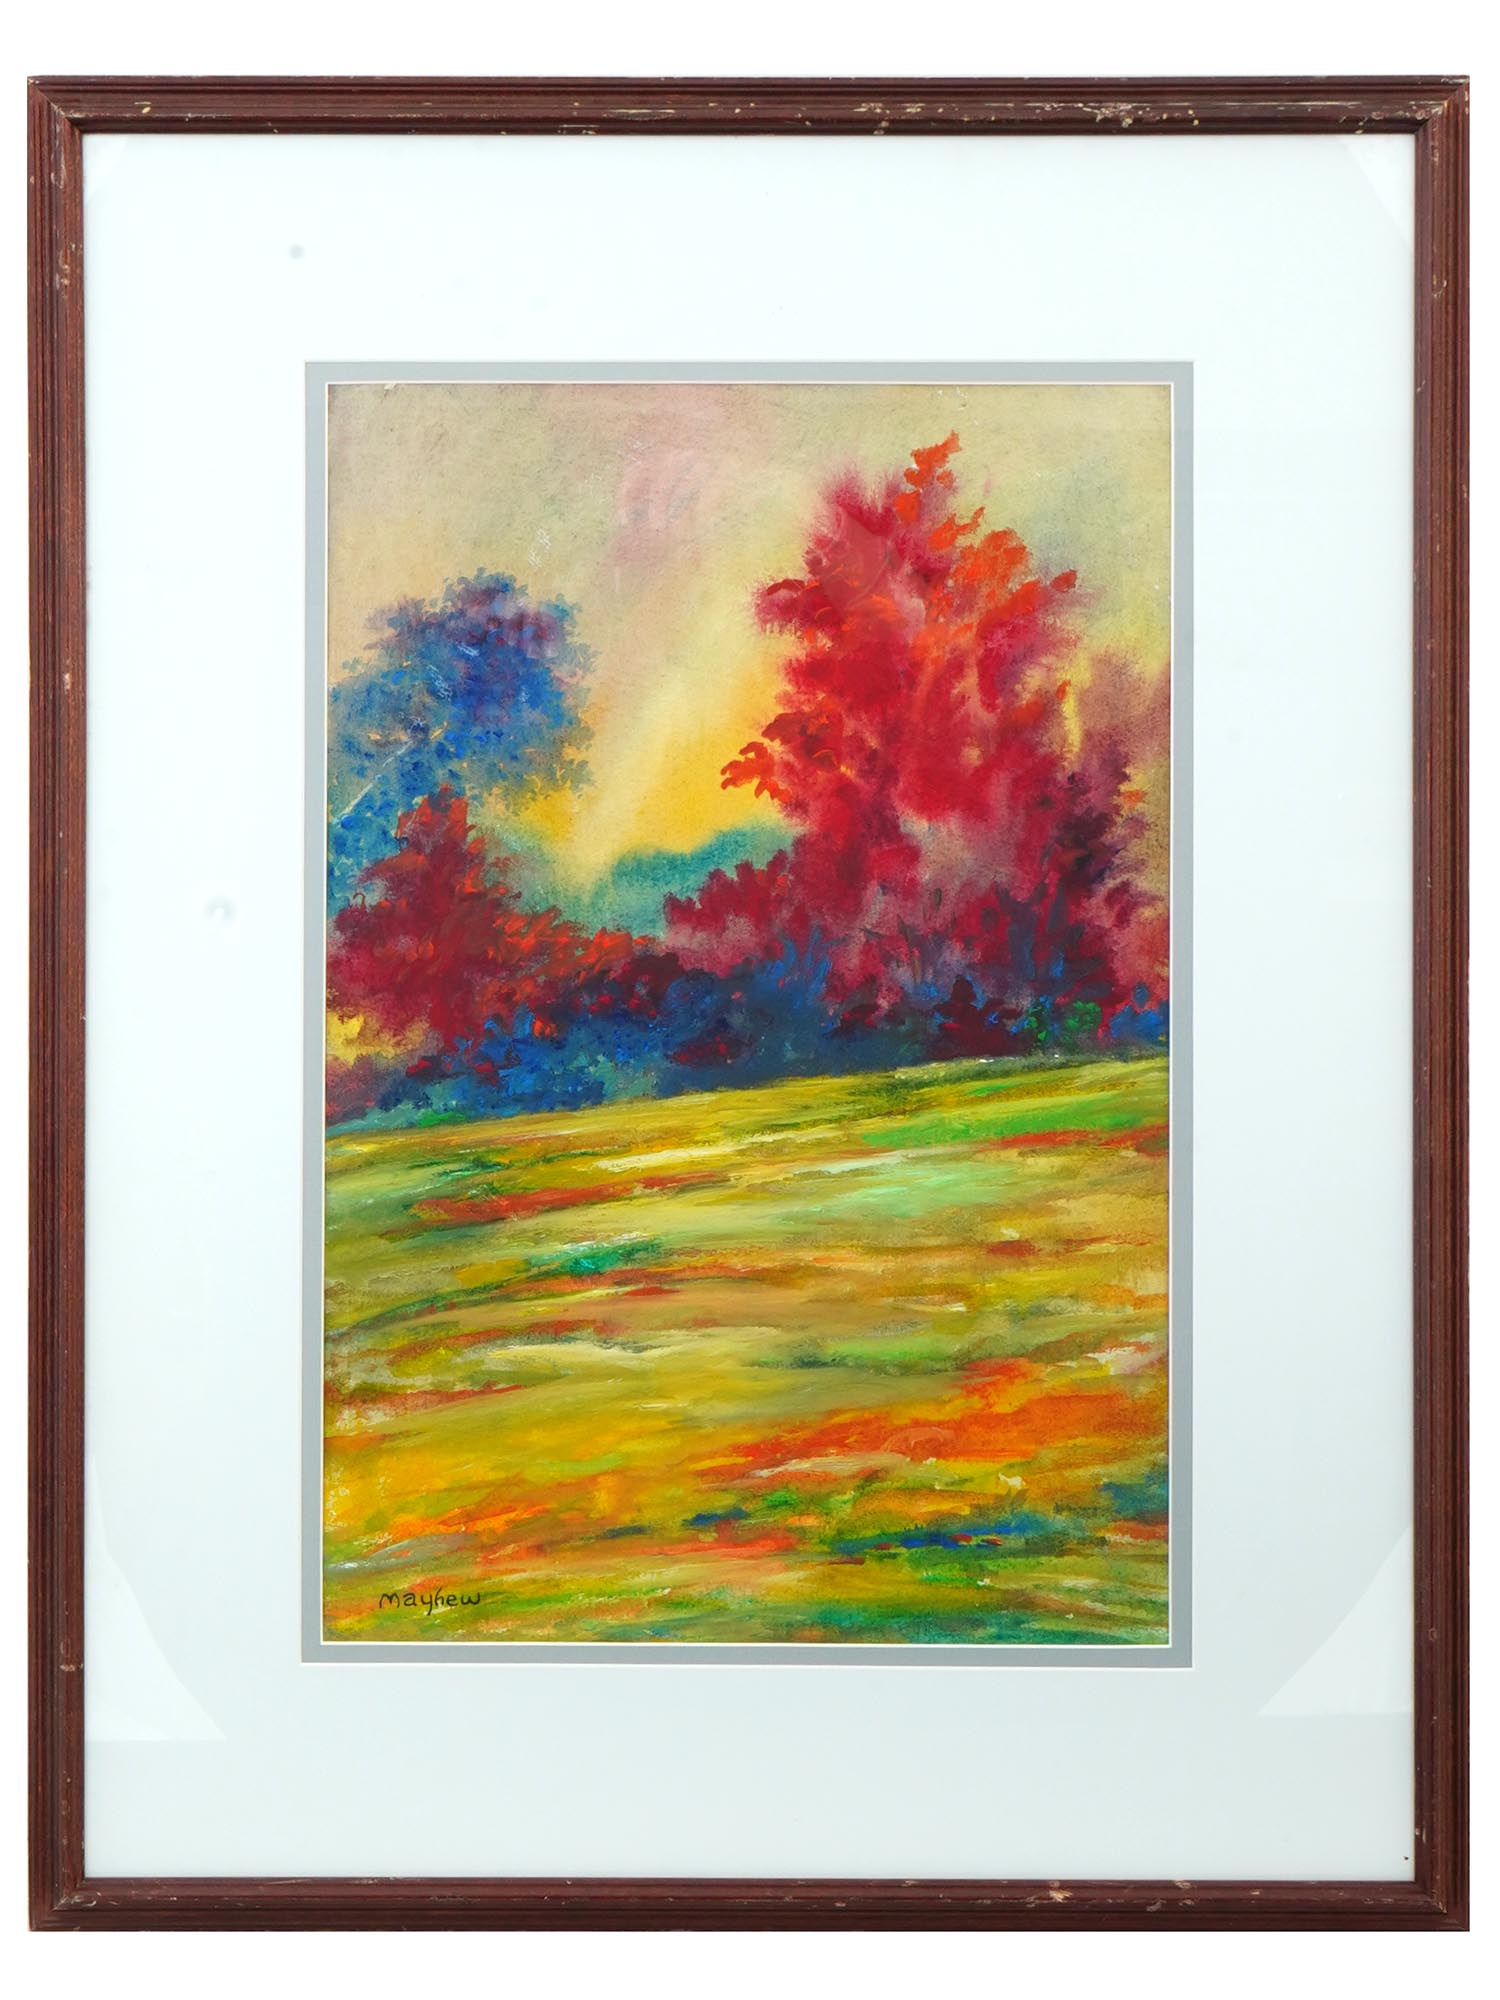 AMERICAN LANDSCAPE PAINTING BY RICHARD MAYHEW FRAMED PIC-0